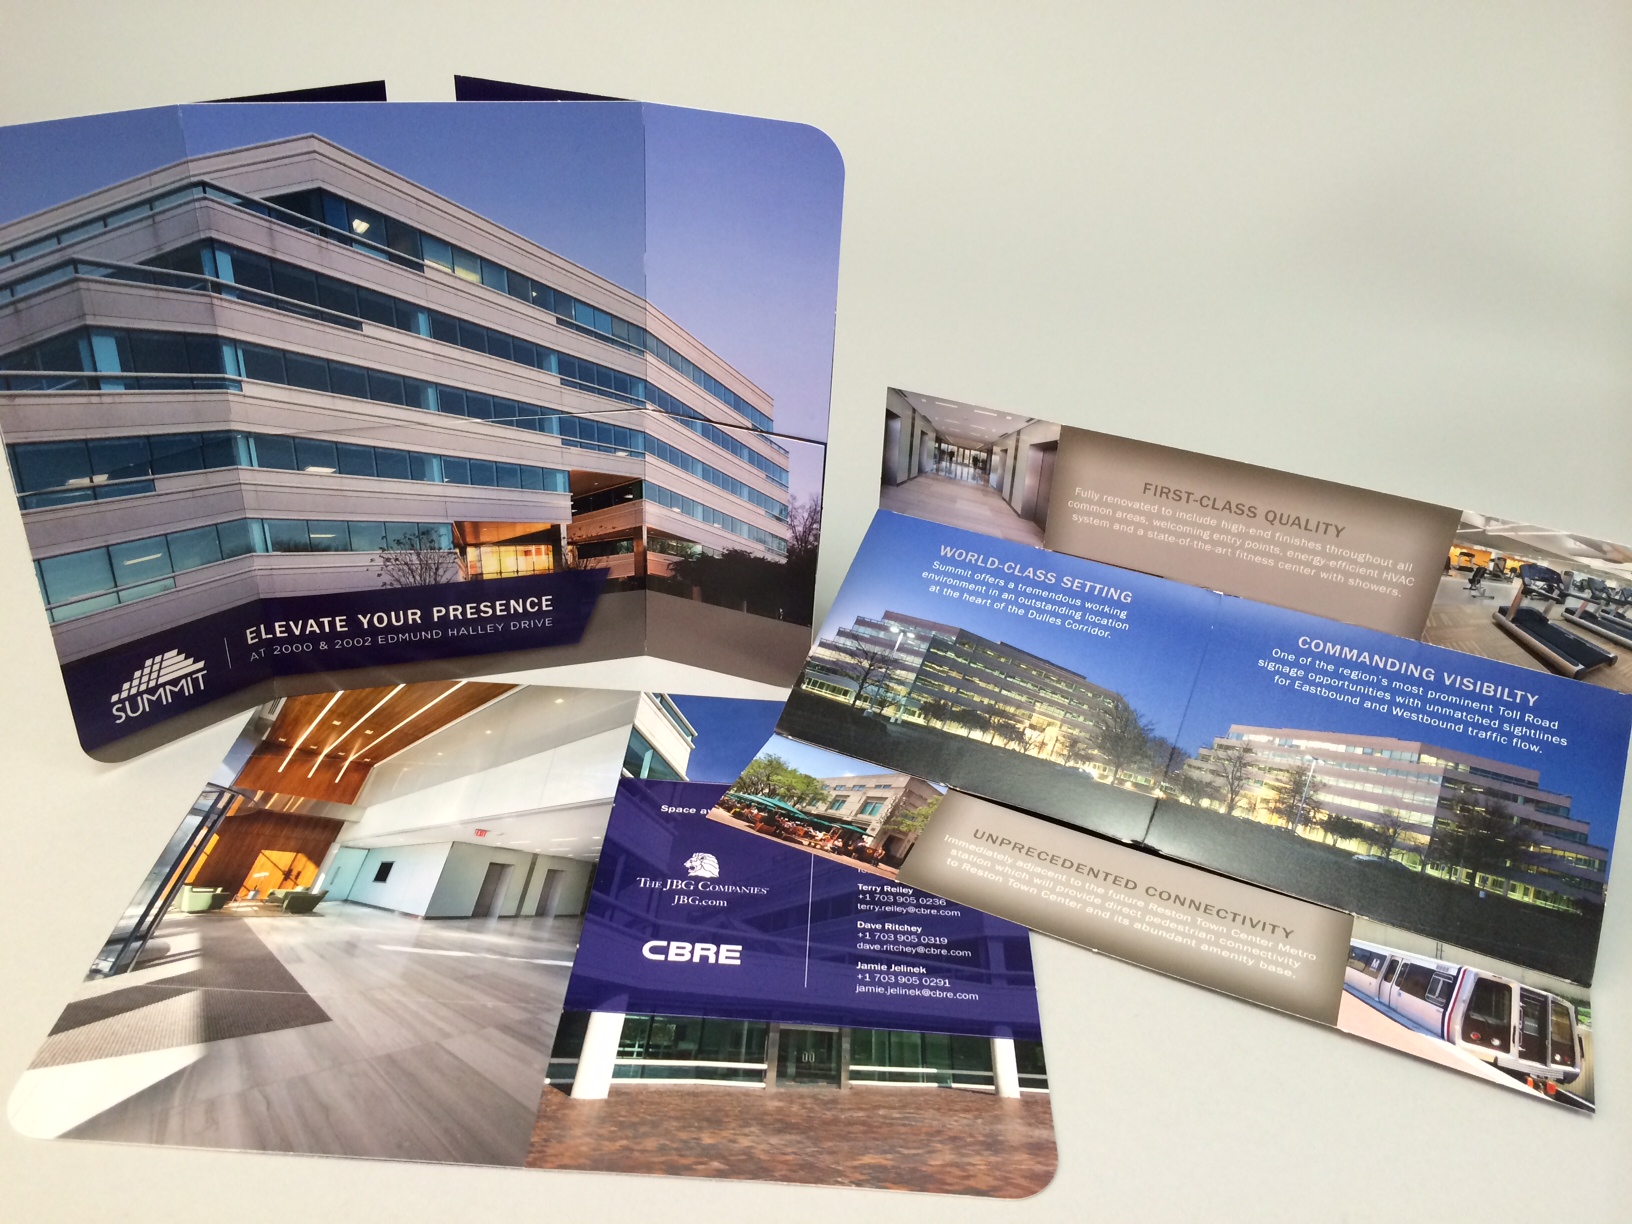 The JBG Companies Uses Tablet Flapper to Promote New Building Developments